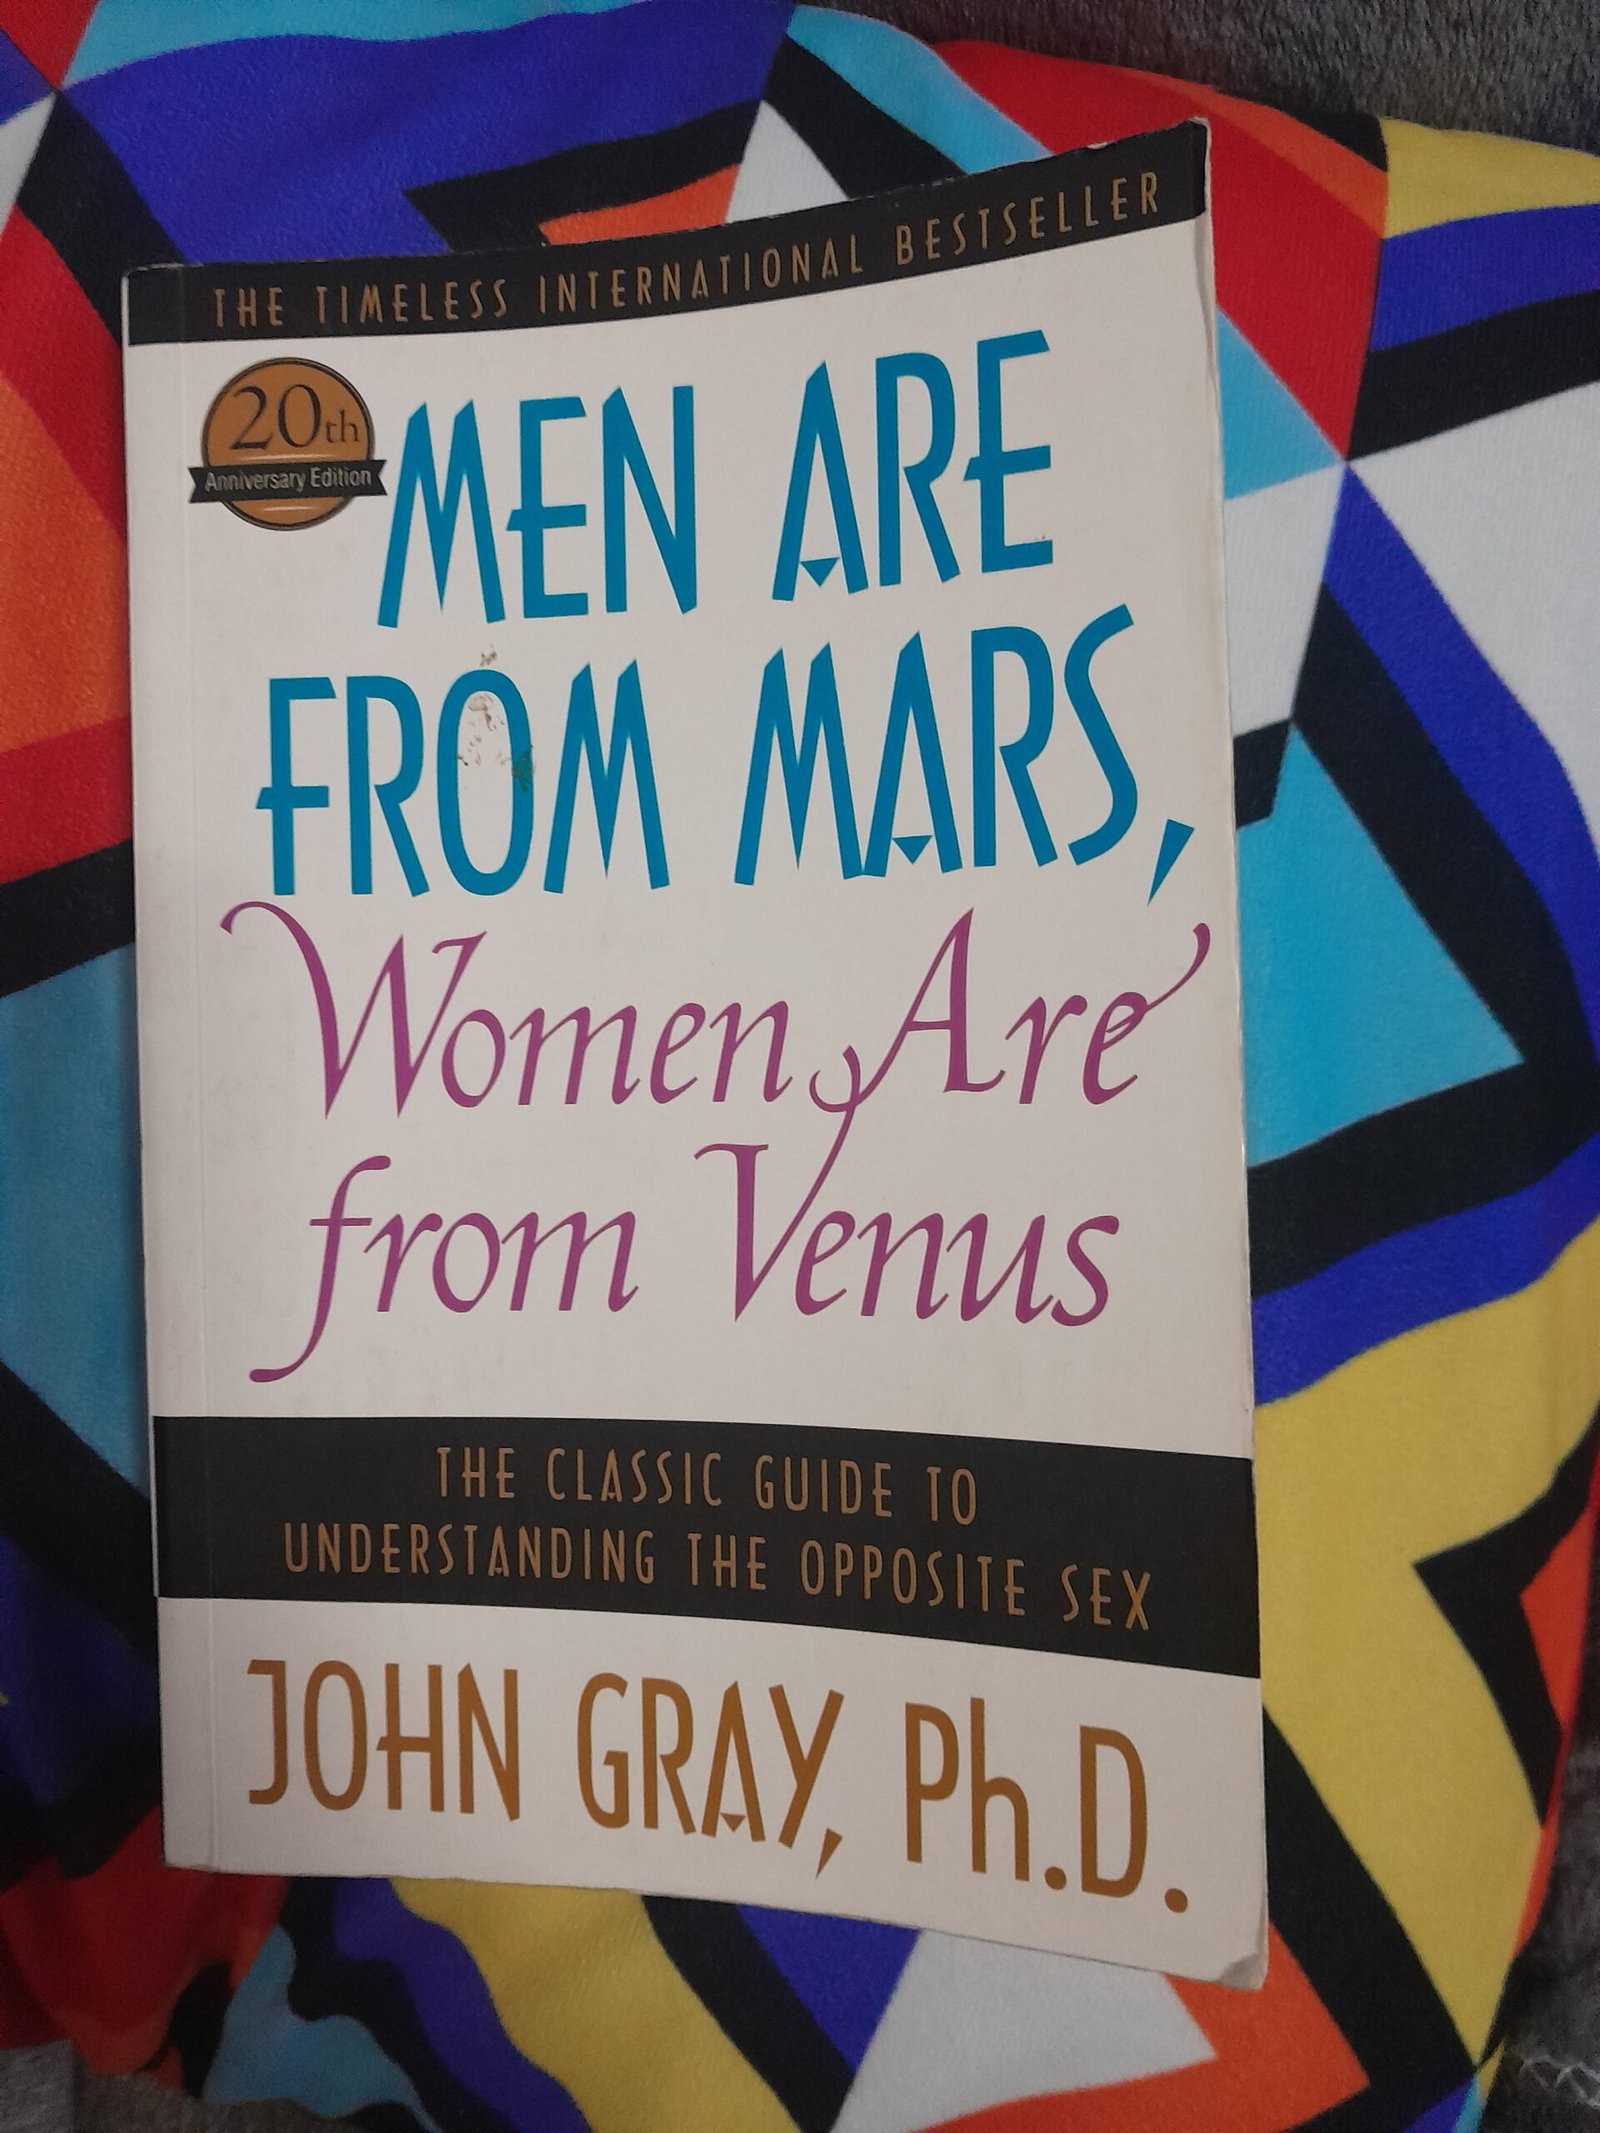 Men Are from Mars, Women Are from Venus: The Classic Guide to